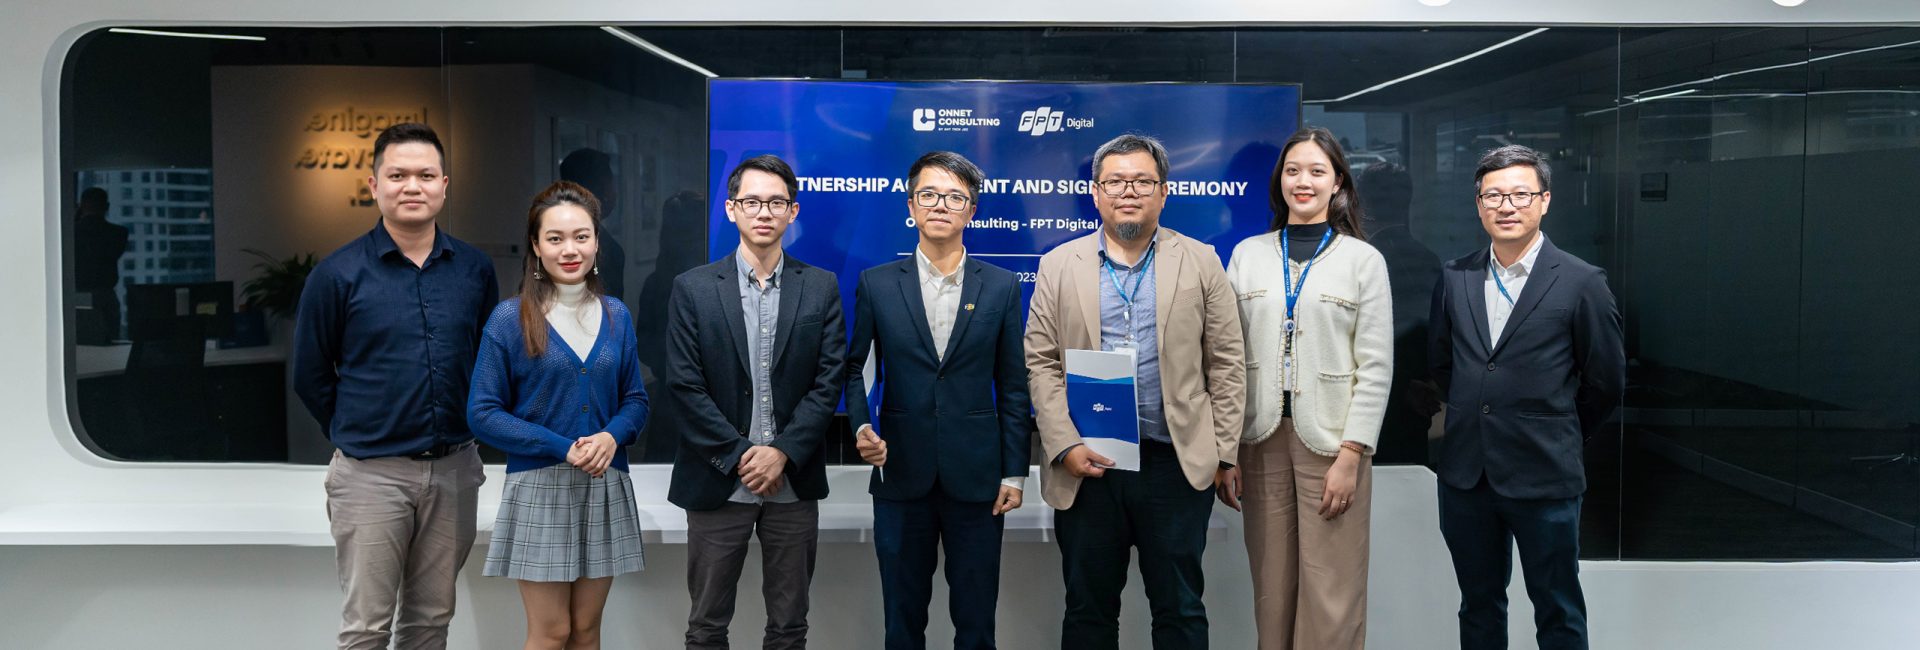 FPT Digital works with Onnet Vietnam to achieve a common goal: Effective business digitalization process